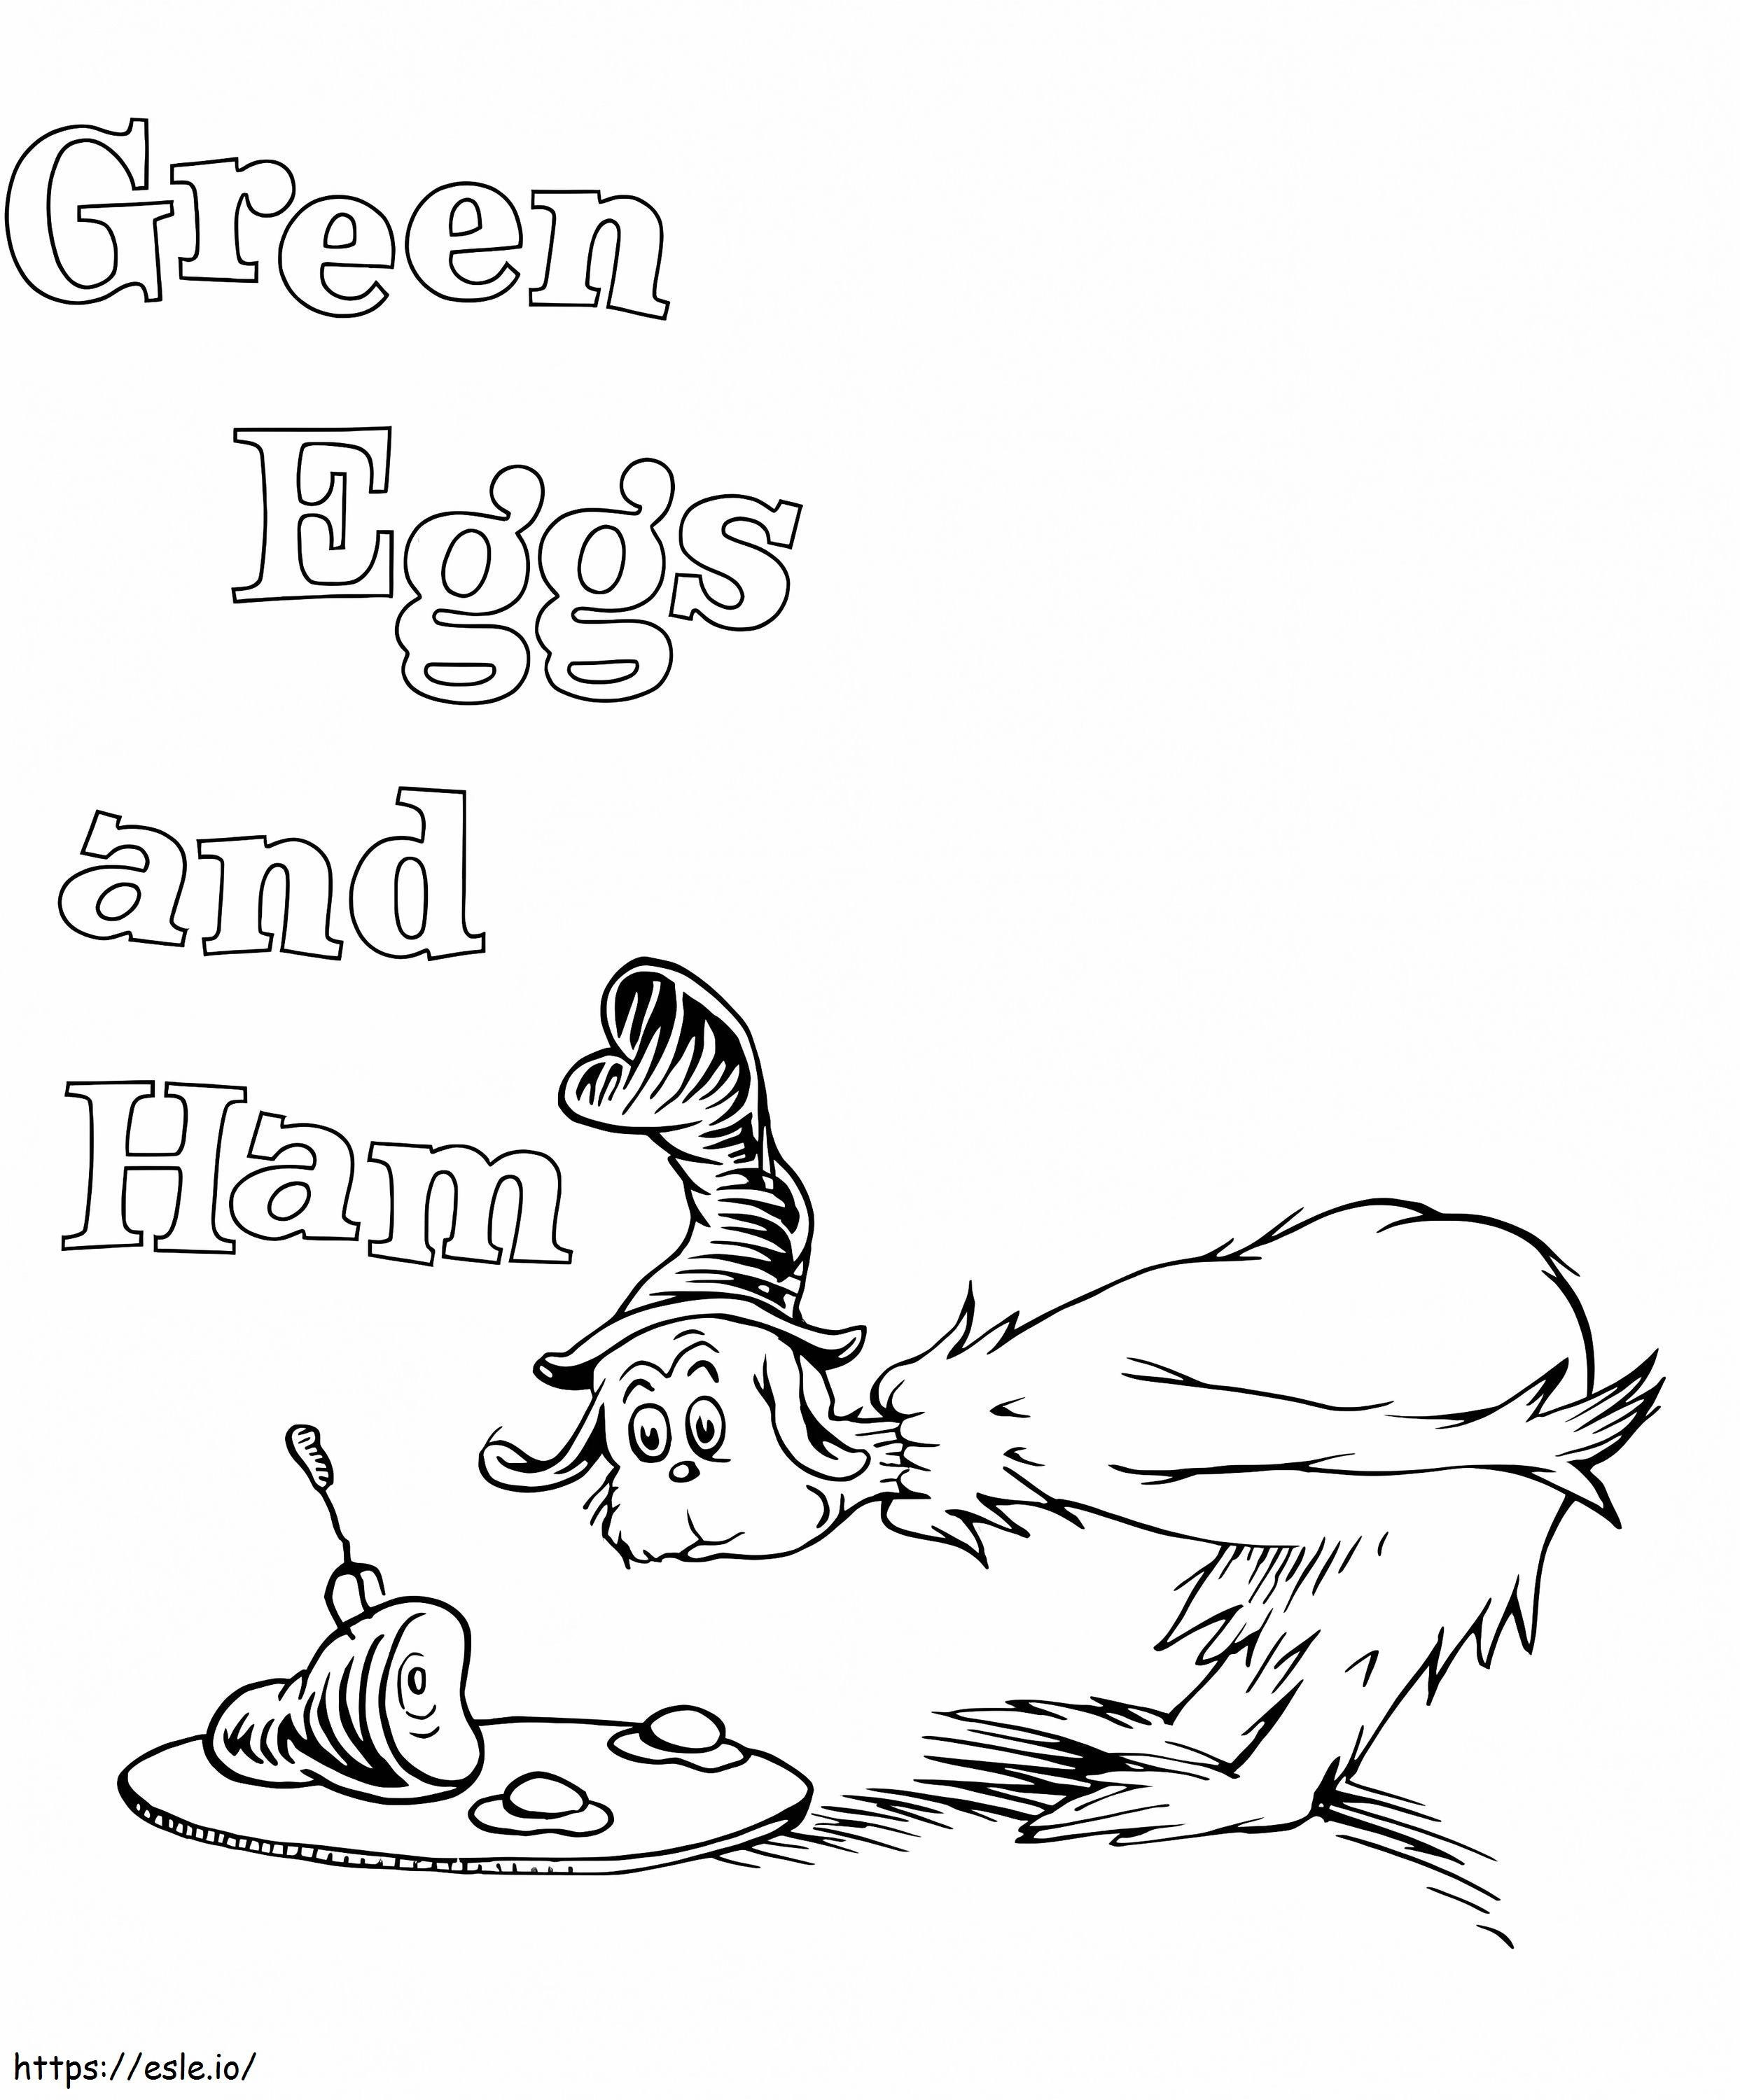 Green Eggs And Ham 7 coloring page